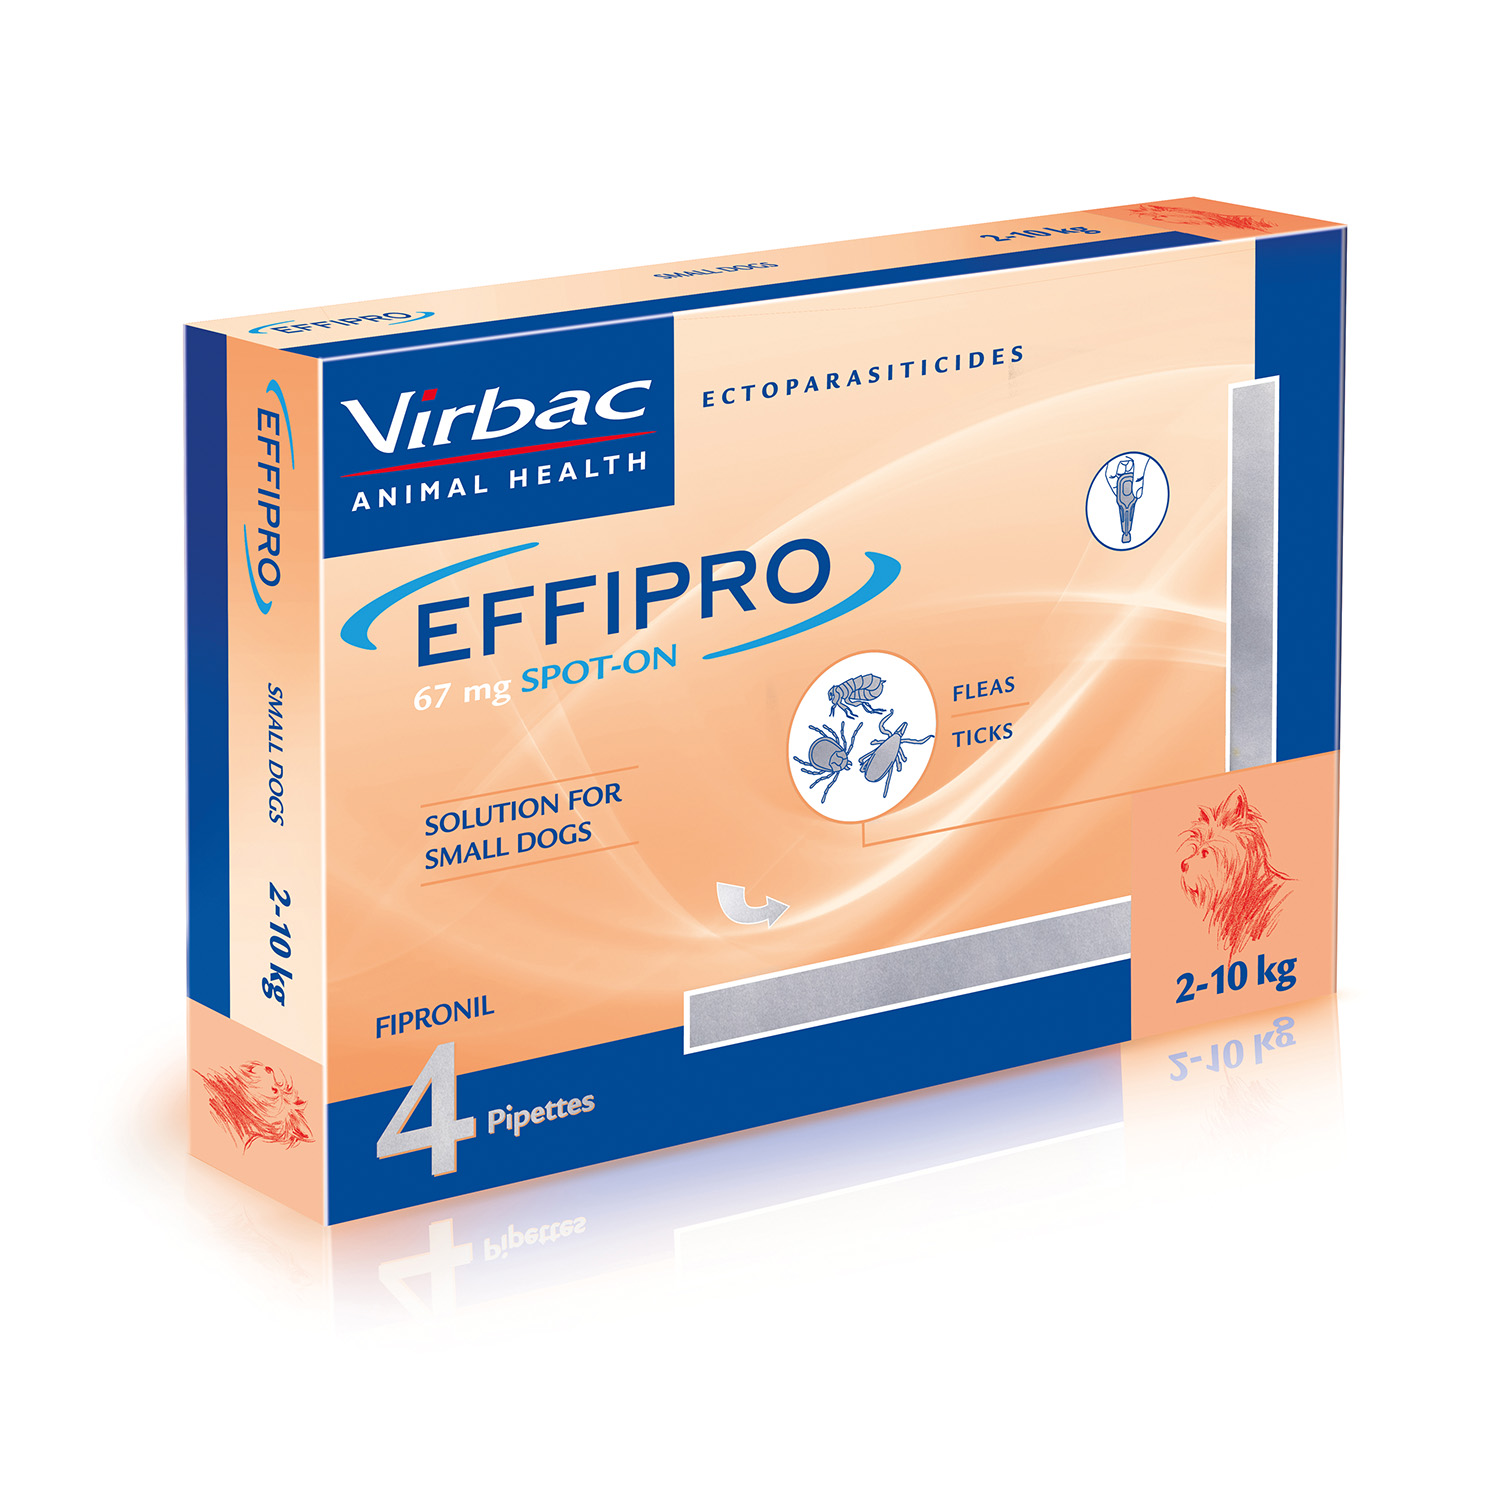 VIRBAC EFFIPRO SPOT ON FOR SMALL DOGS 4 PIPETTES 4 PIPETTES